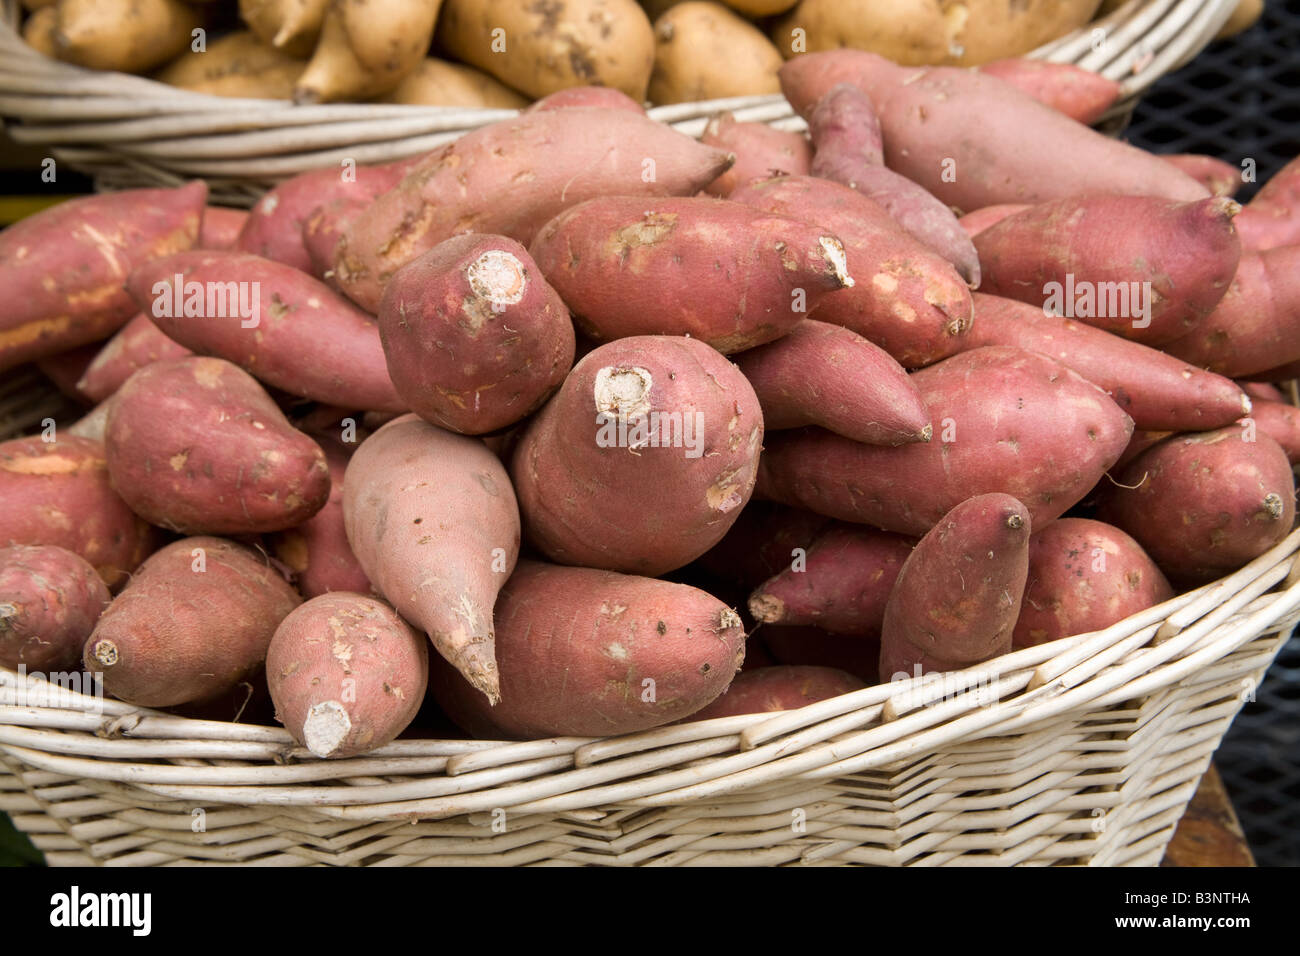 Two baskets of sweet potatoes (yams) for sale at an outdoor market Stock Photo